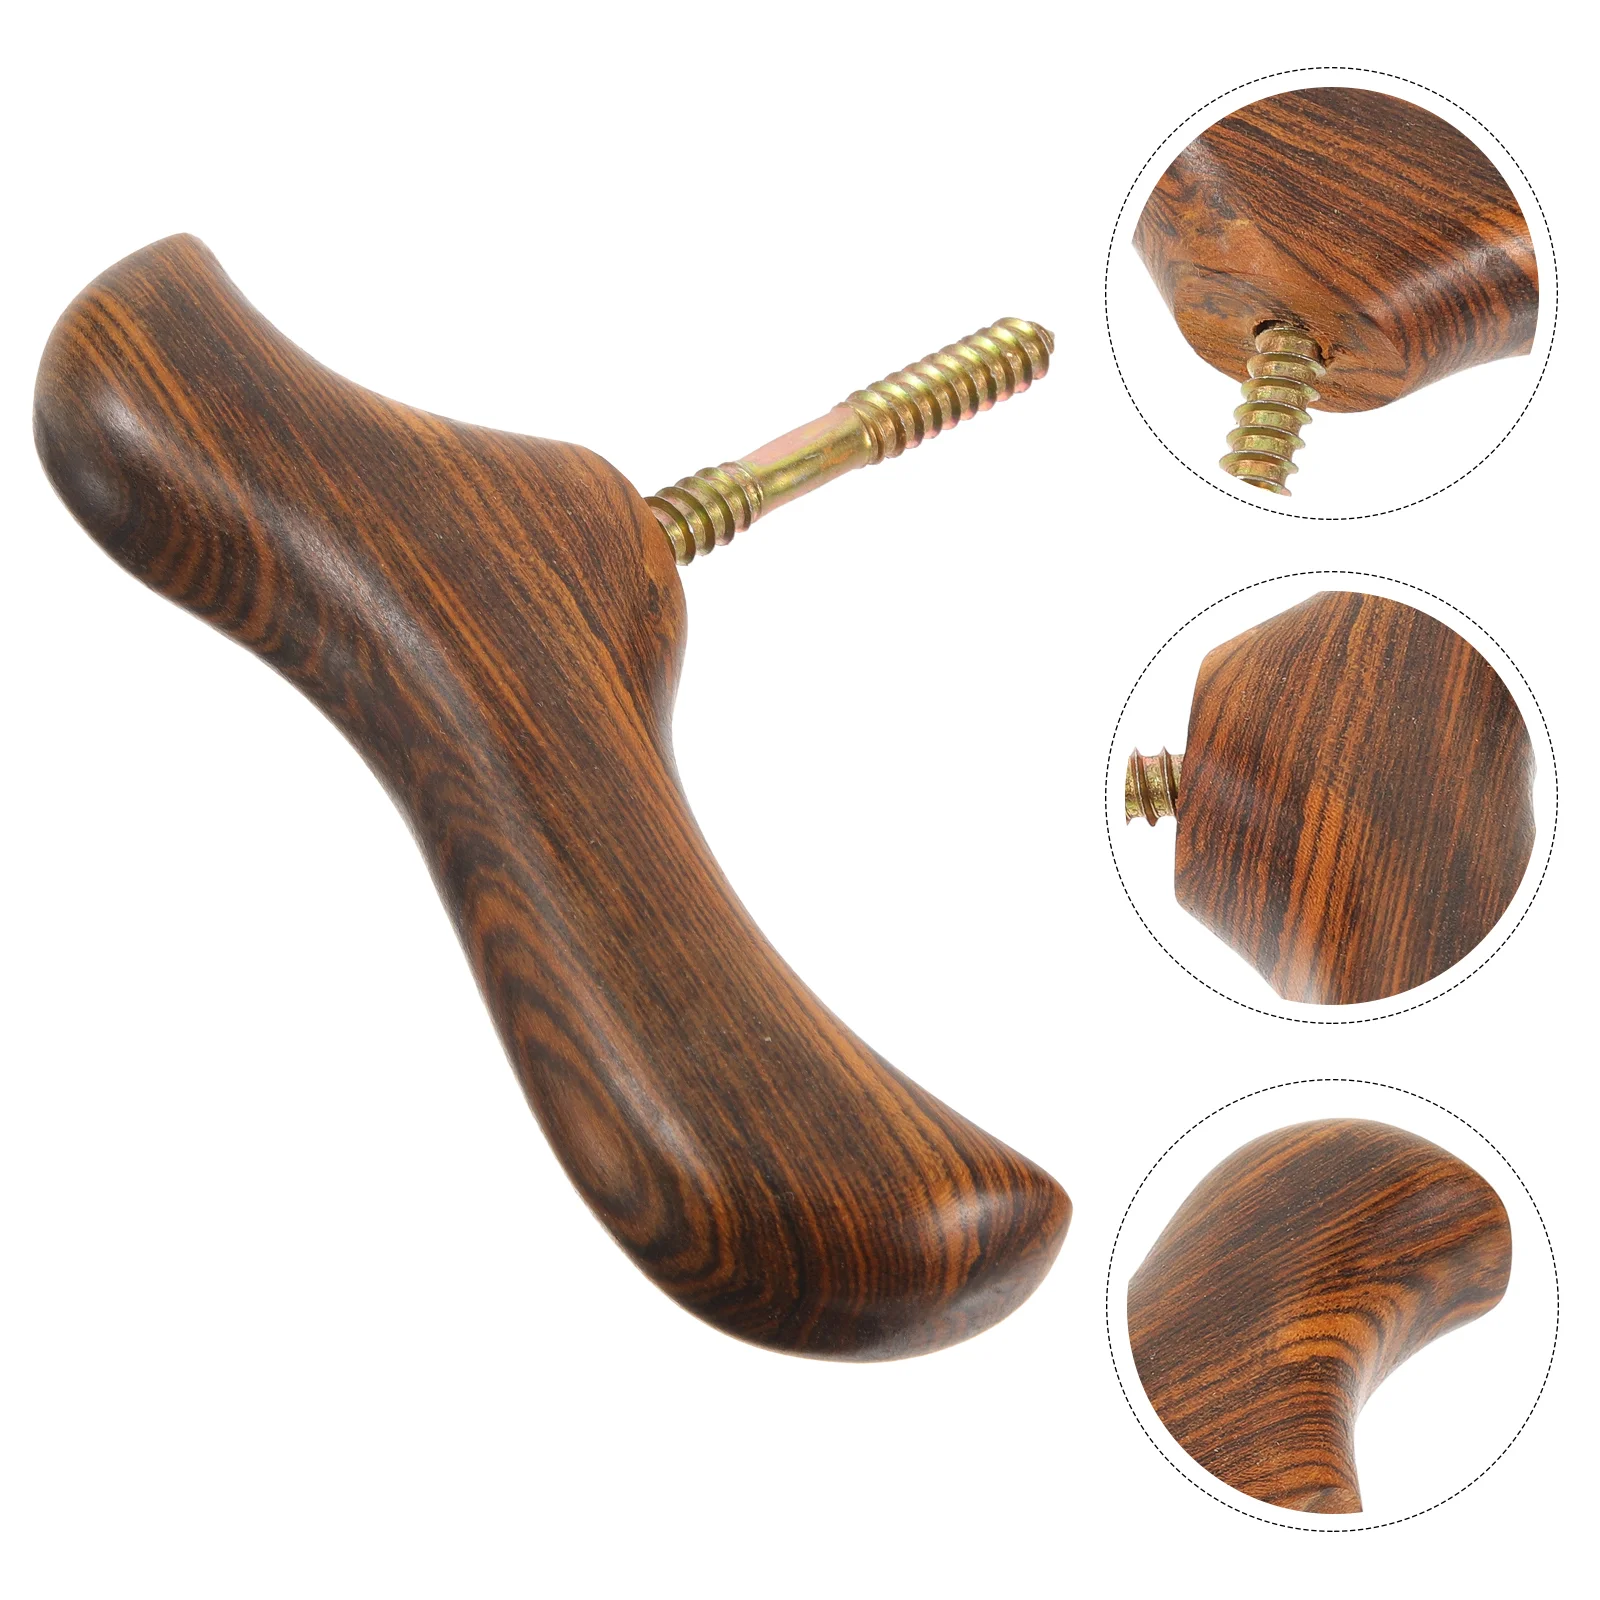 

Cane Handle Replacement Cane Knob Handmade Stick Handle Walking Cane Handle Cane Head for Outdoor Replacement Elderly